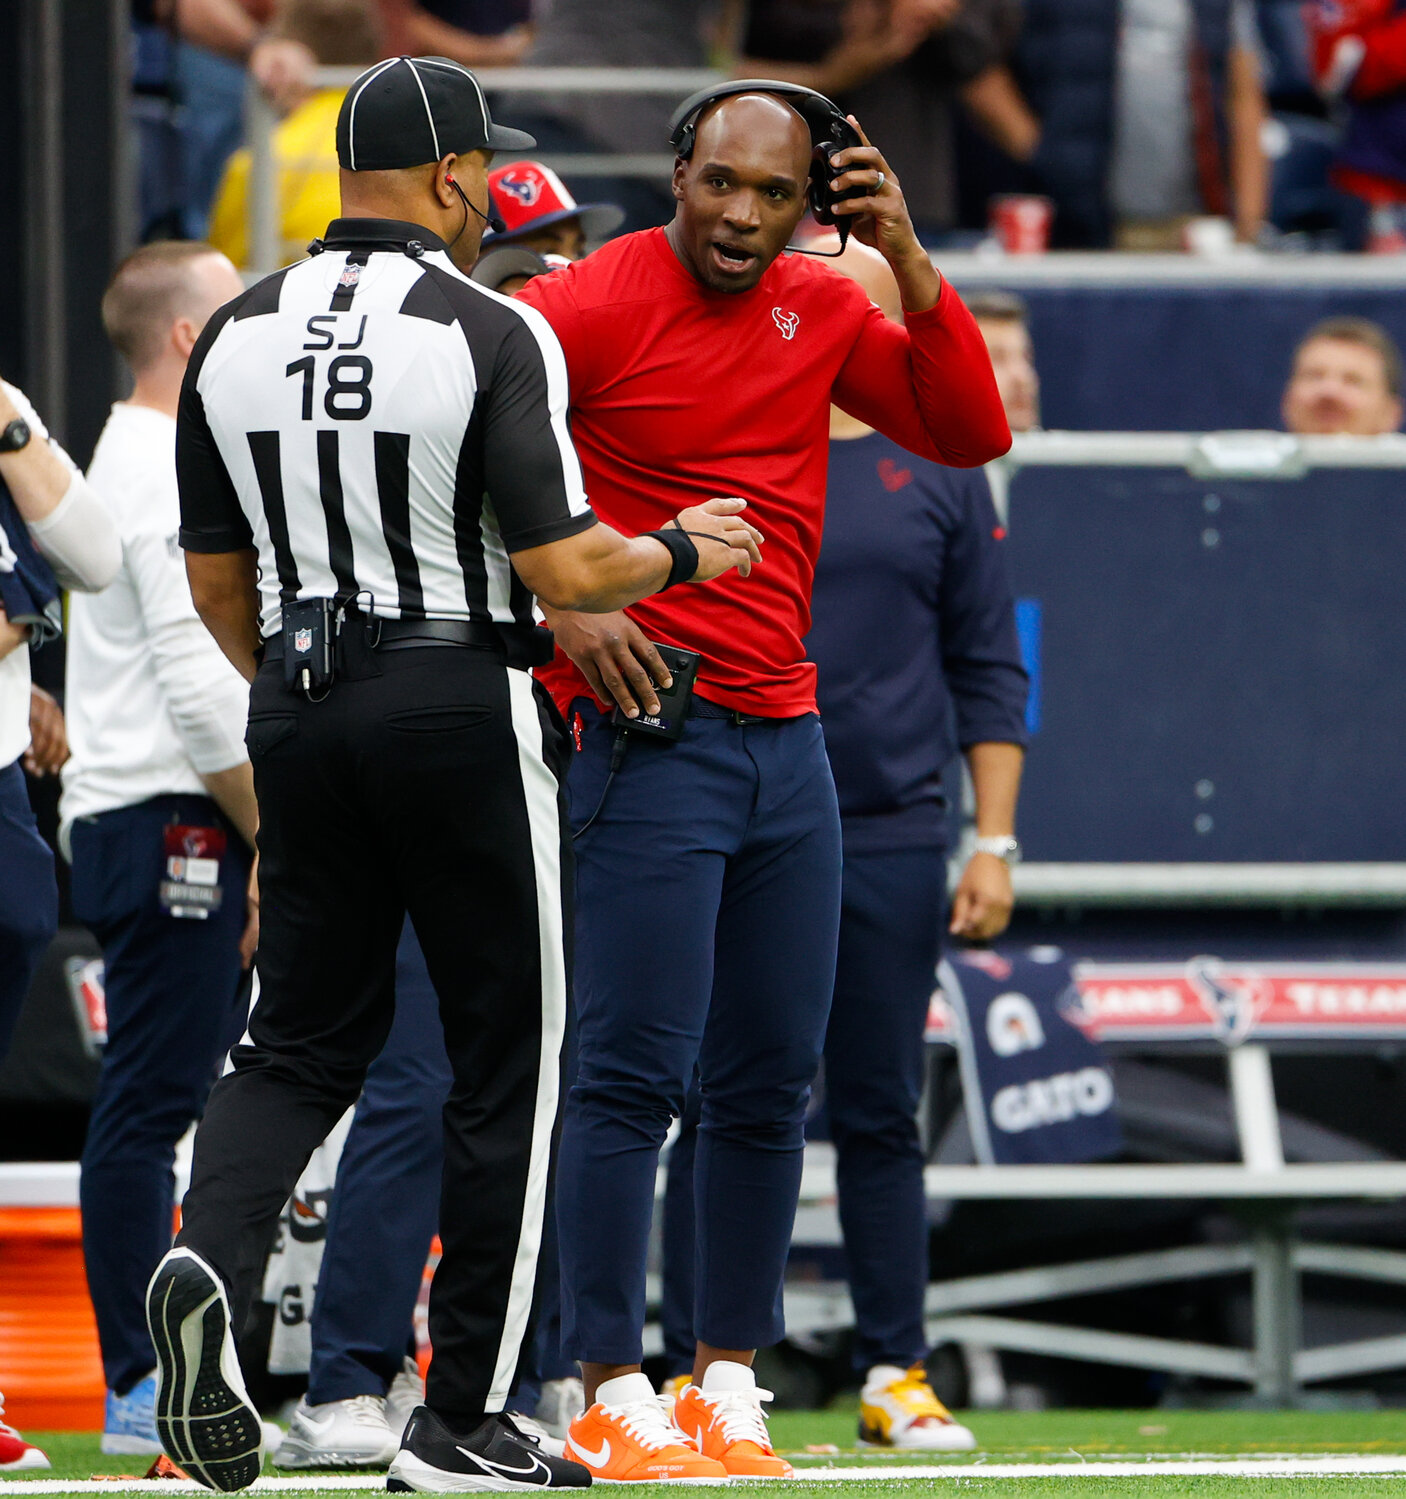 Texans head coach DeMeco Ryans discusses a play with side judge Clay Reynard (18) during an NFL game between the Texans and the Broncos on December 3, 2023 in Houston. The Texans won, 22-17.